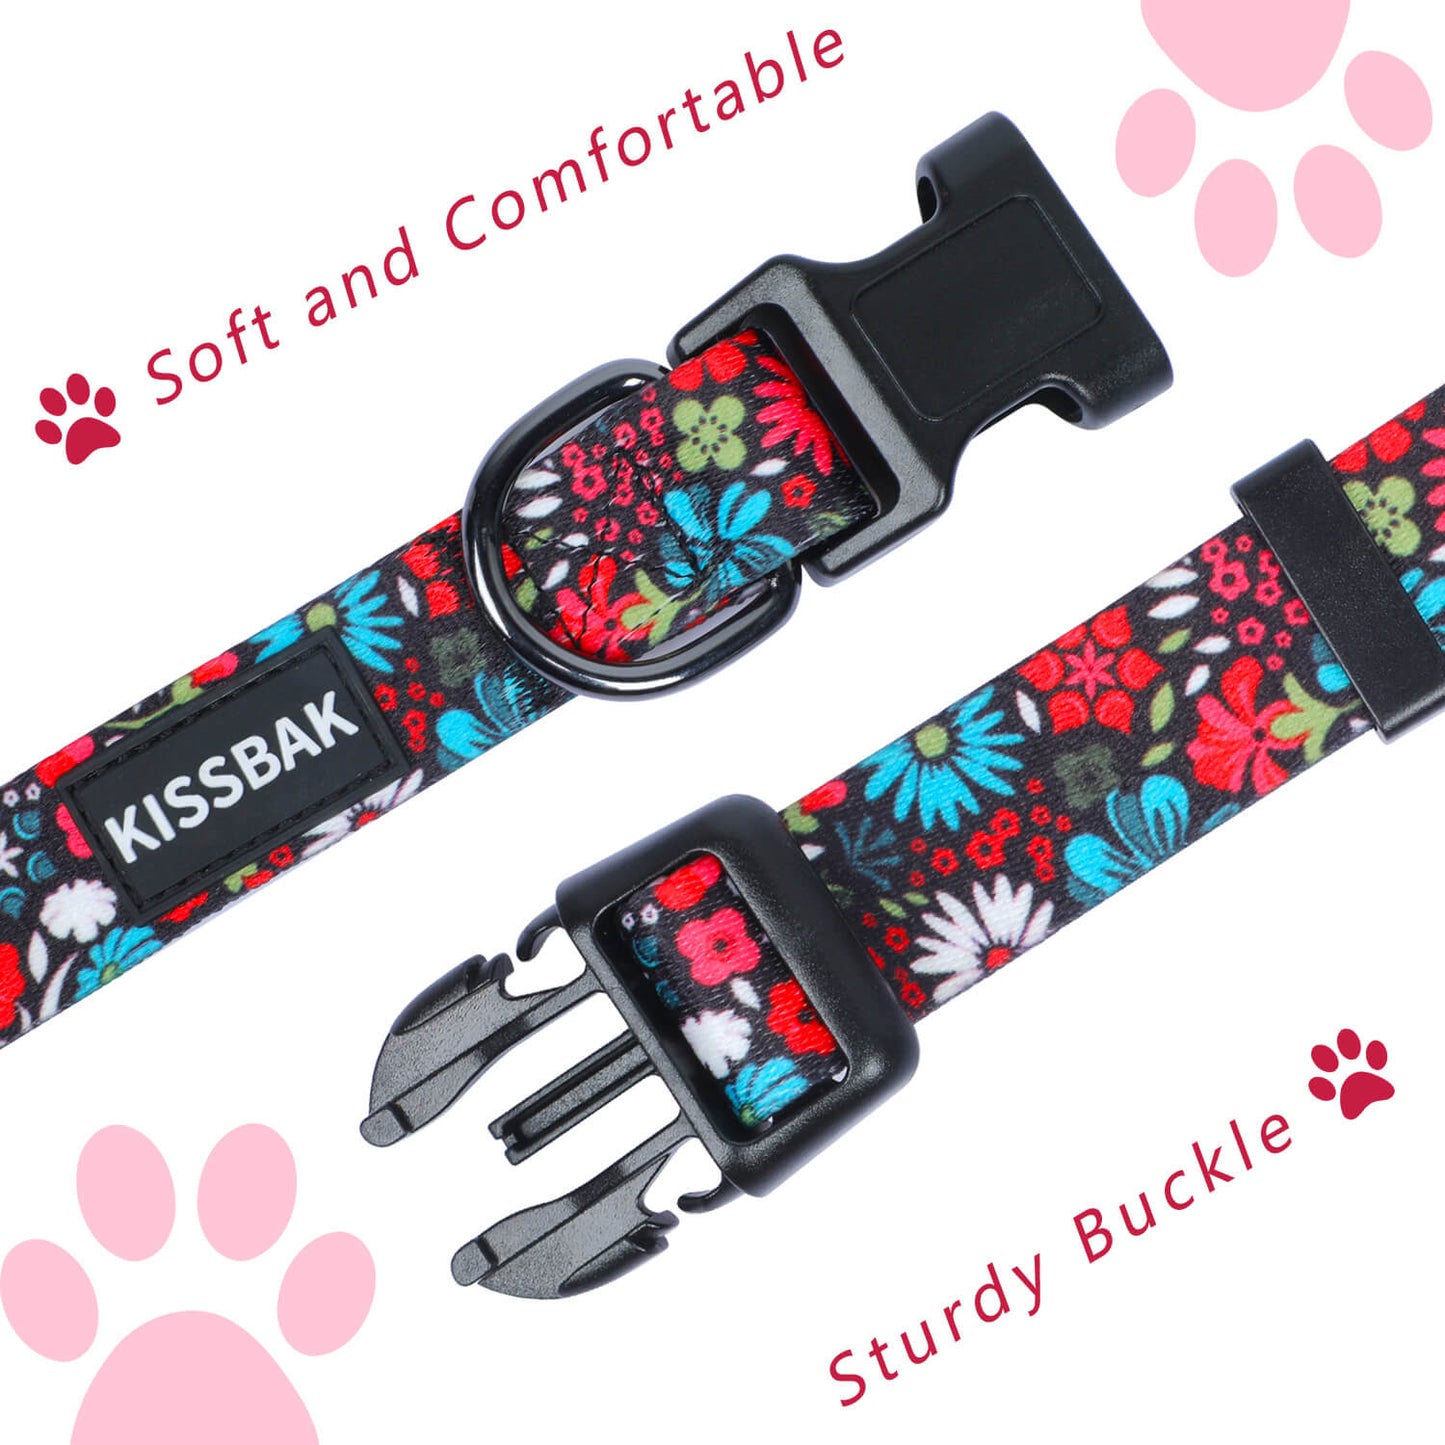 KISSBAK Dog Collar for Small Dogs - Special Design Cute Girl Dog Pet Collar  Soft Adjustable Fancy Floral Girl Puppy Dog Collars (XS, Floral)